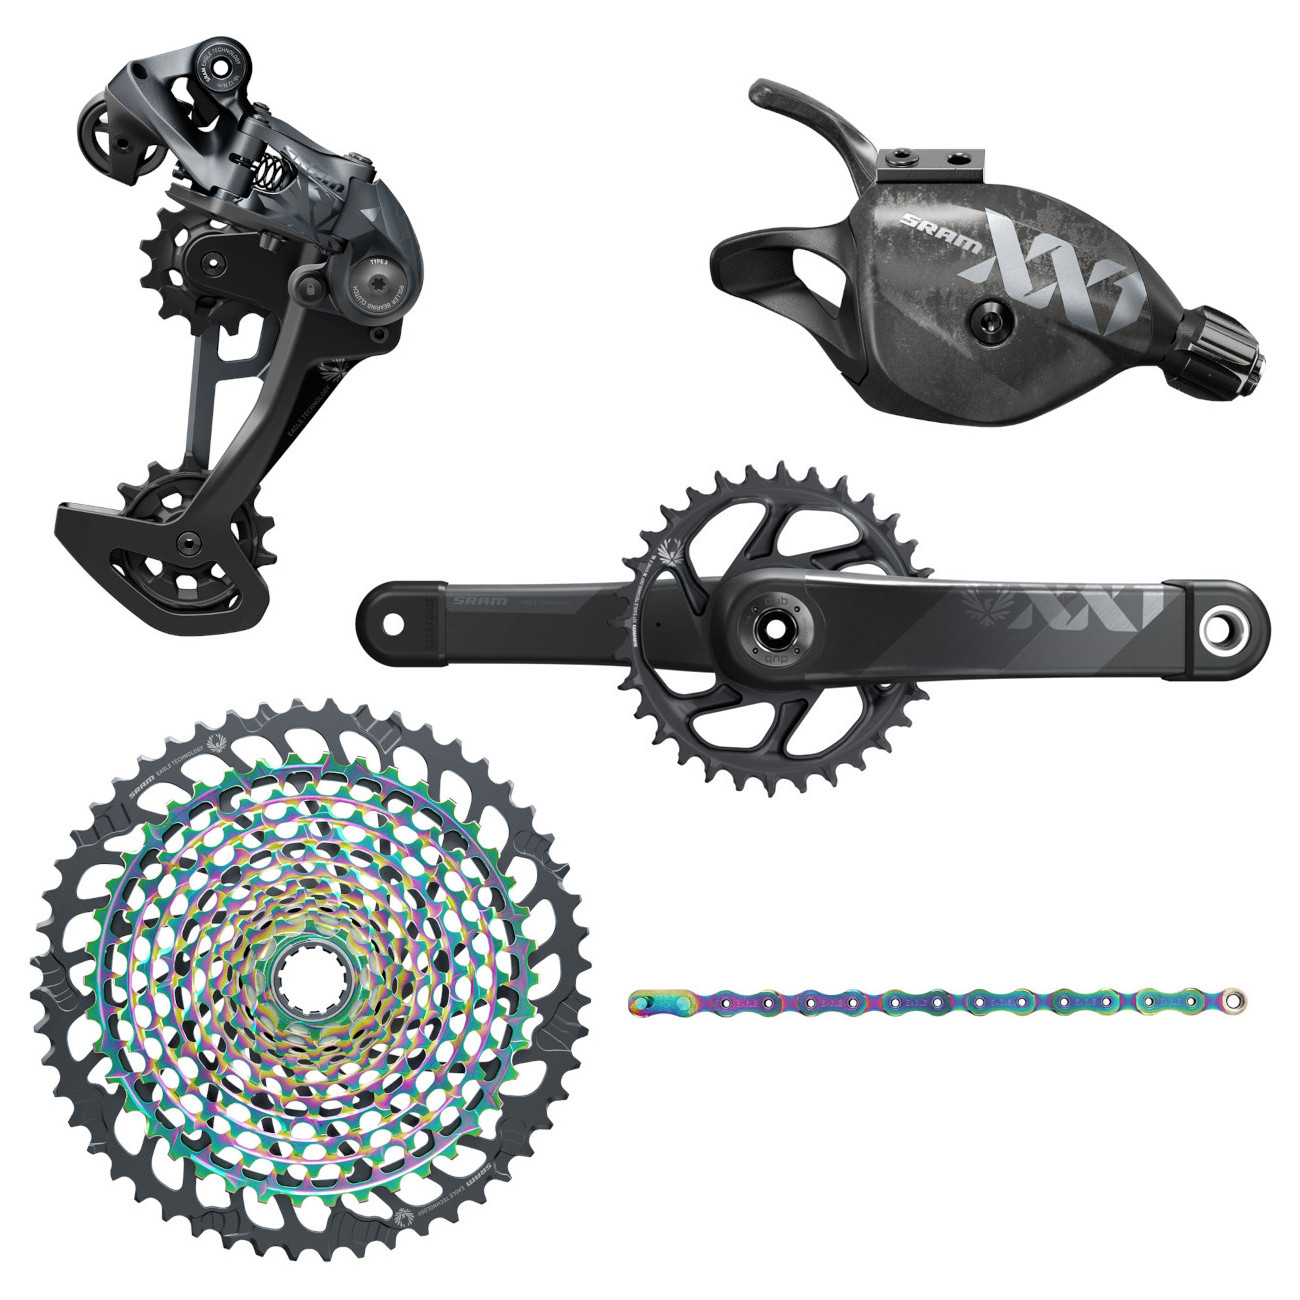 Picture of SRAM XX1 Eagle Boost Groupset - 1x12-speed - Trigger Shifter - 10-52 t. XG-1299 Cassette - rainbow